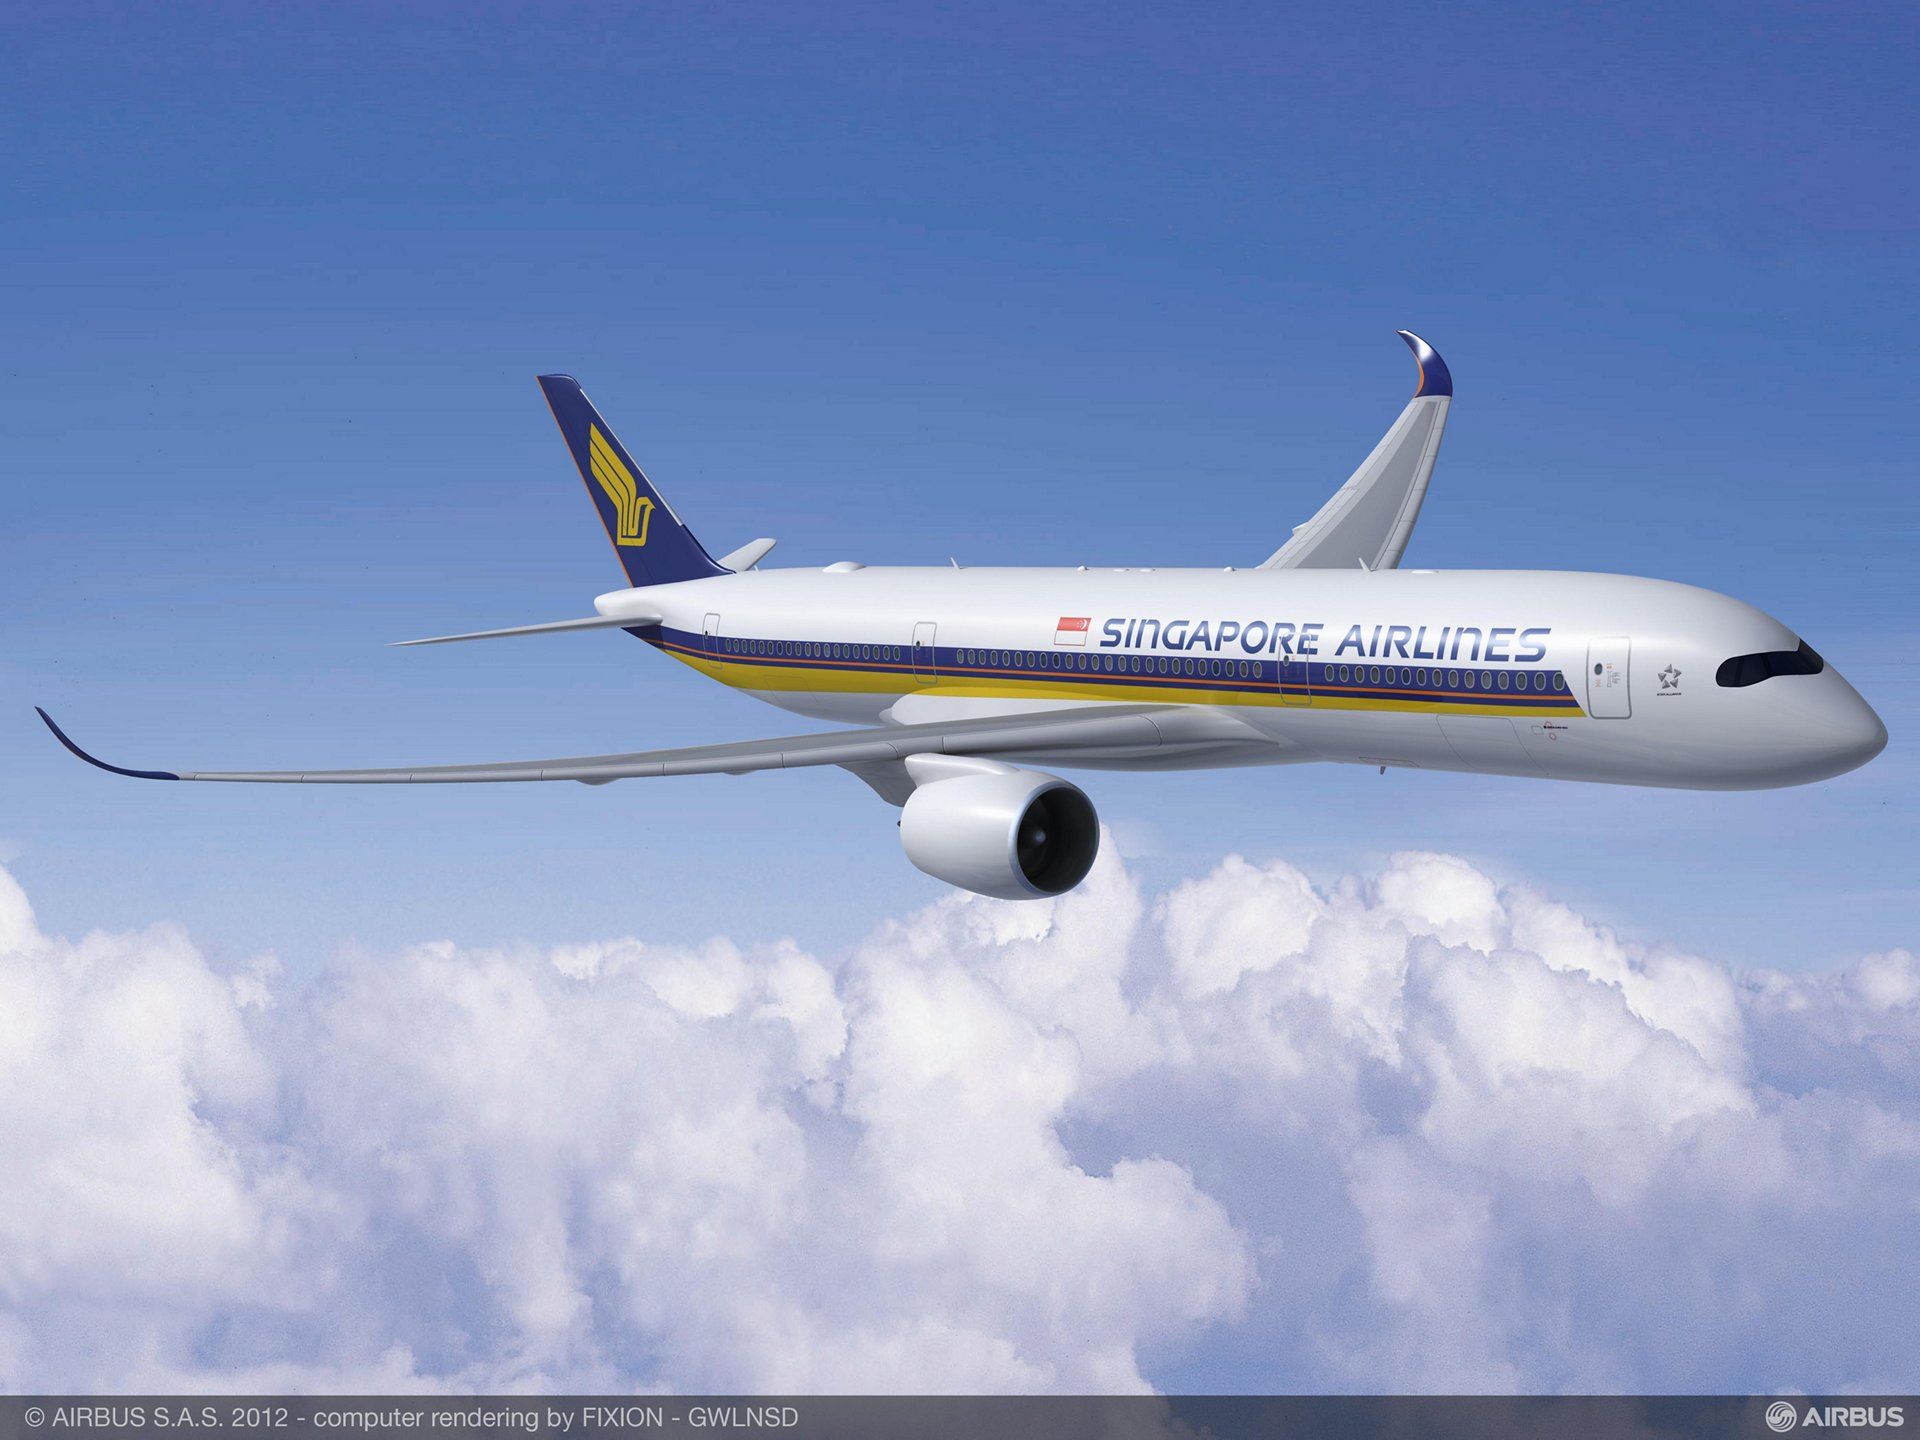 Singapore Airlines to order more A380s and A350 XWBs